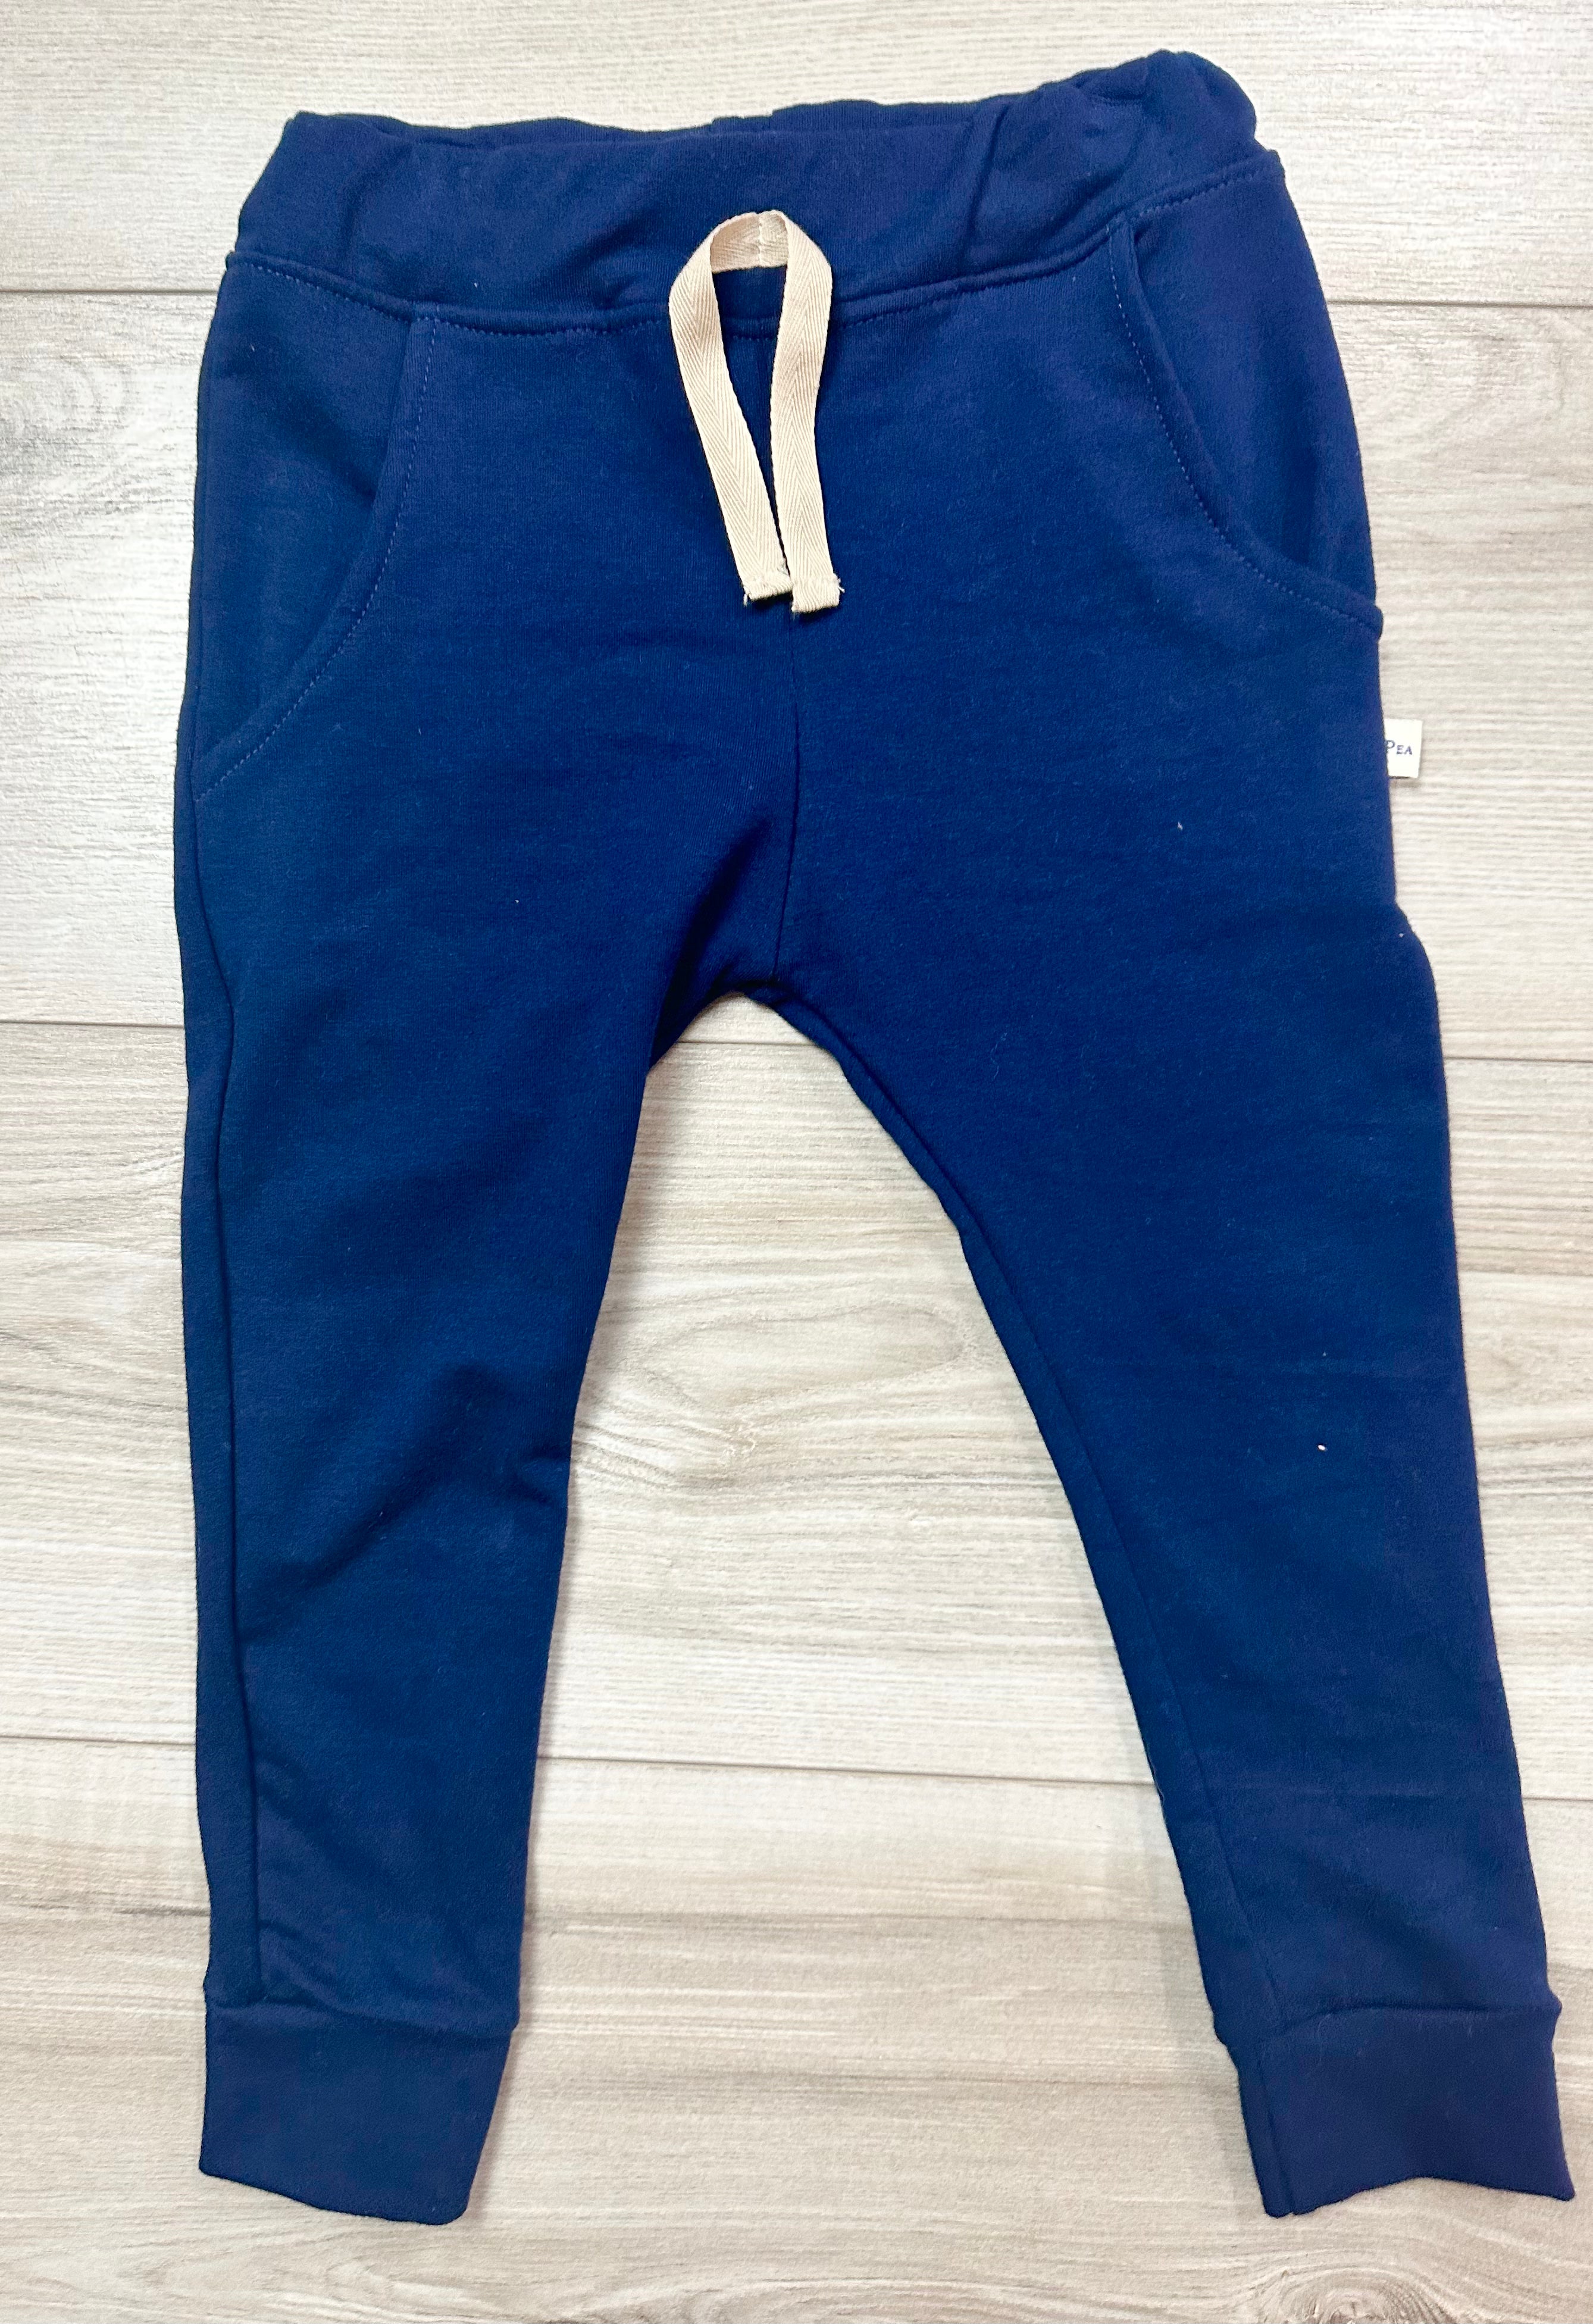 Classic Navy Joggers (ships in 2 weeks()